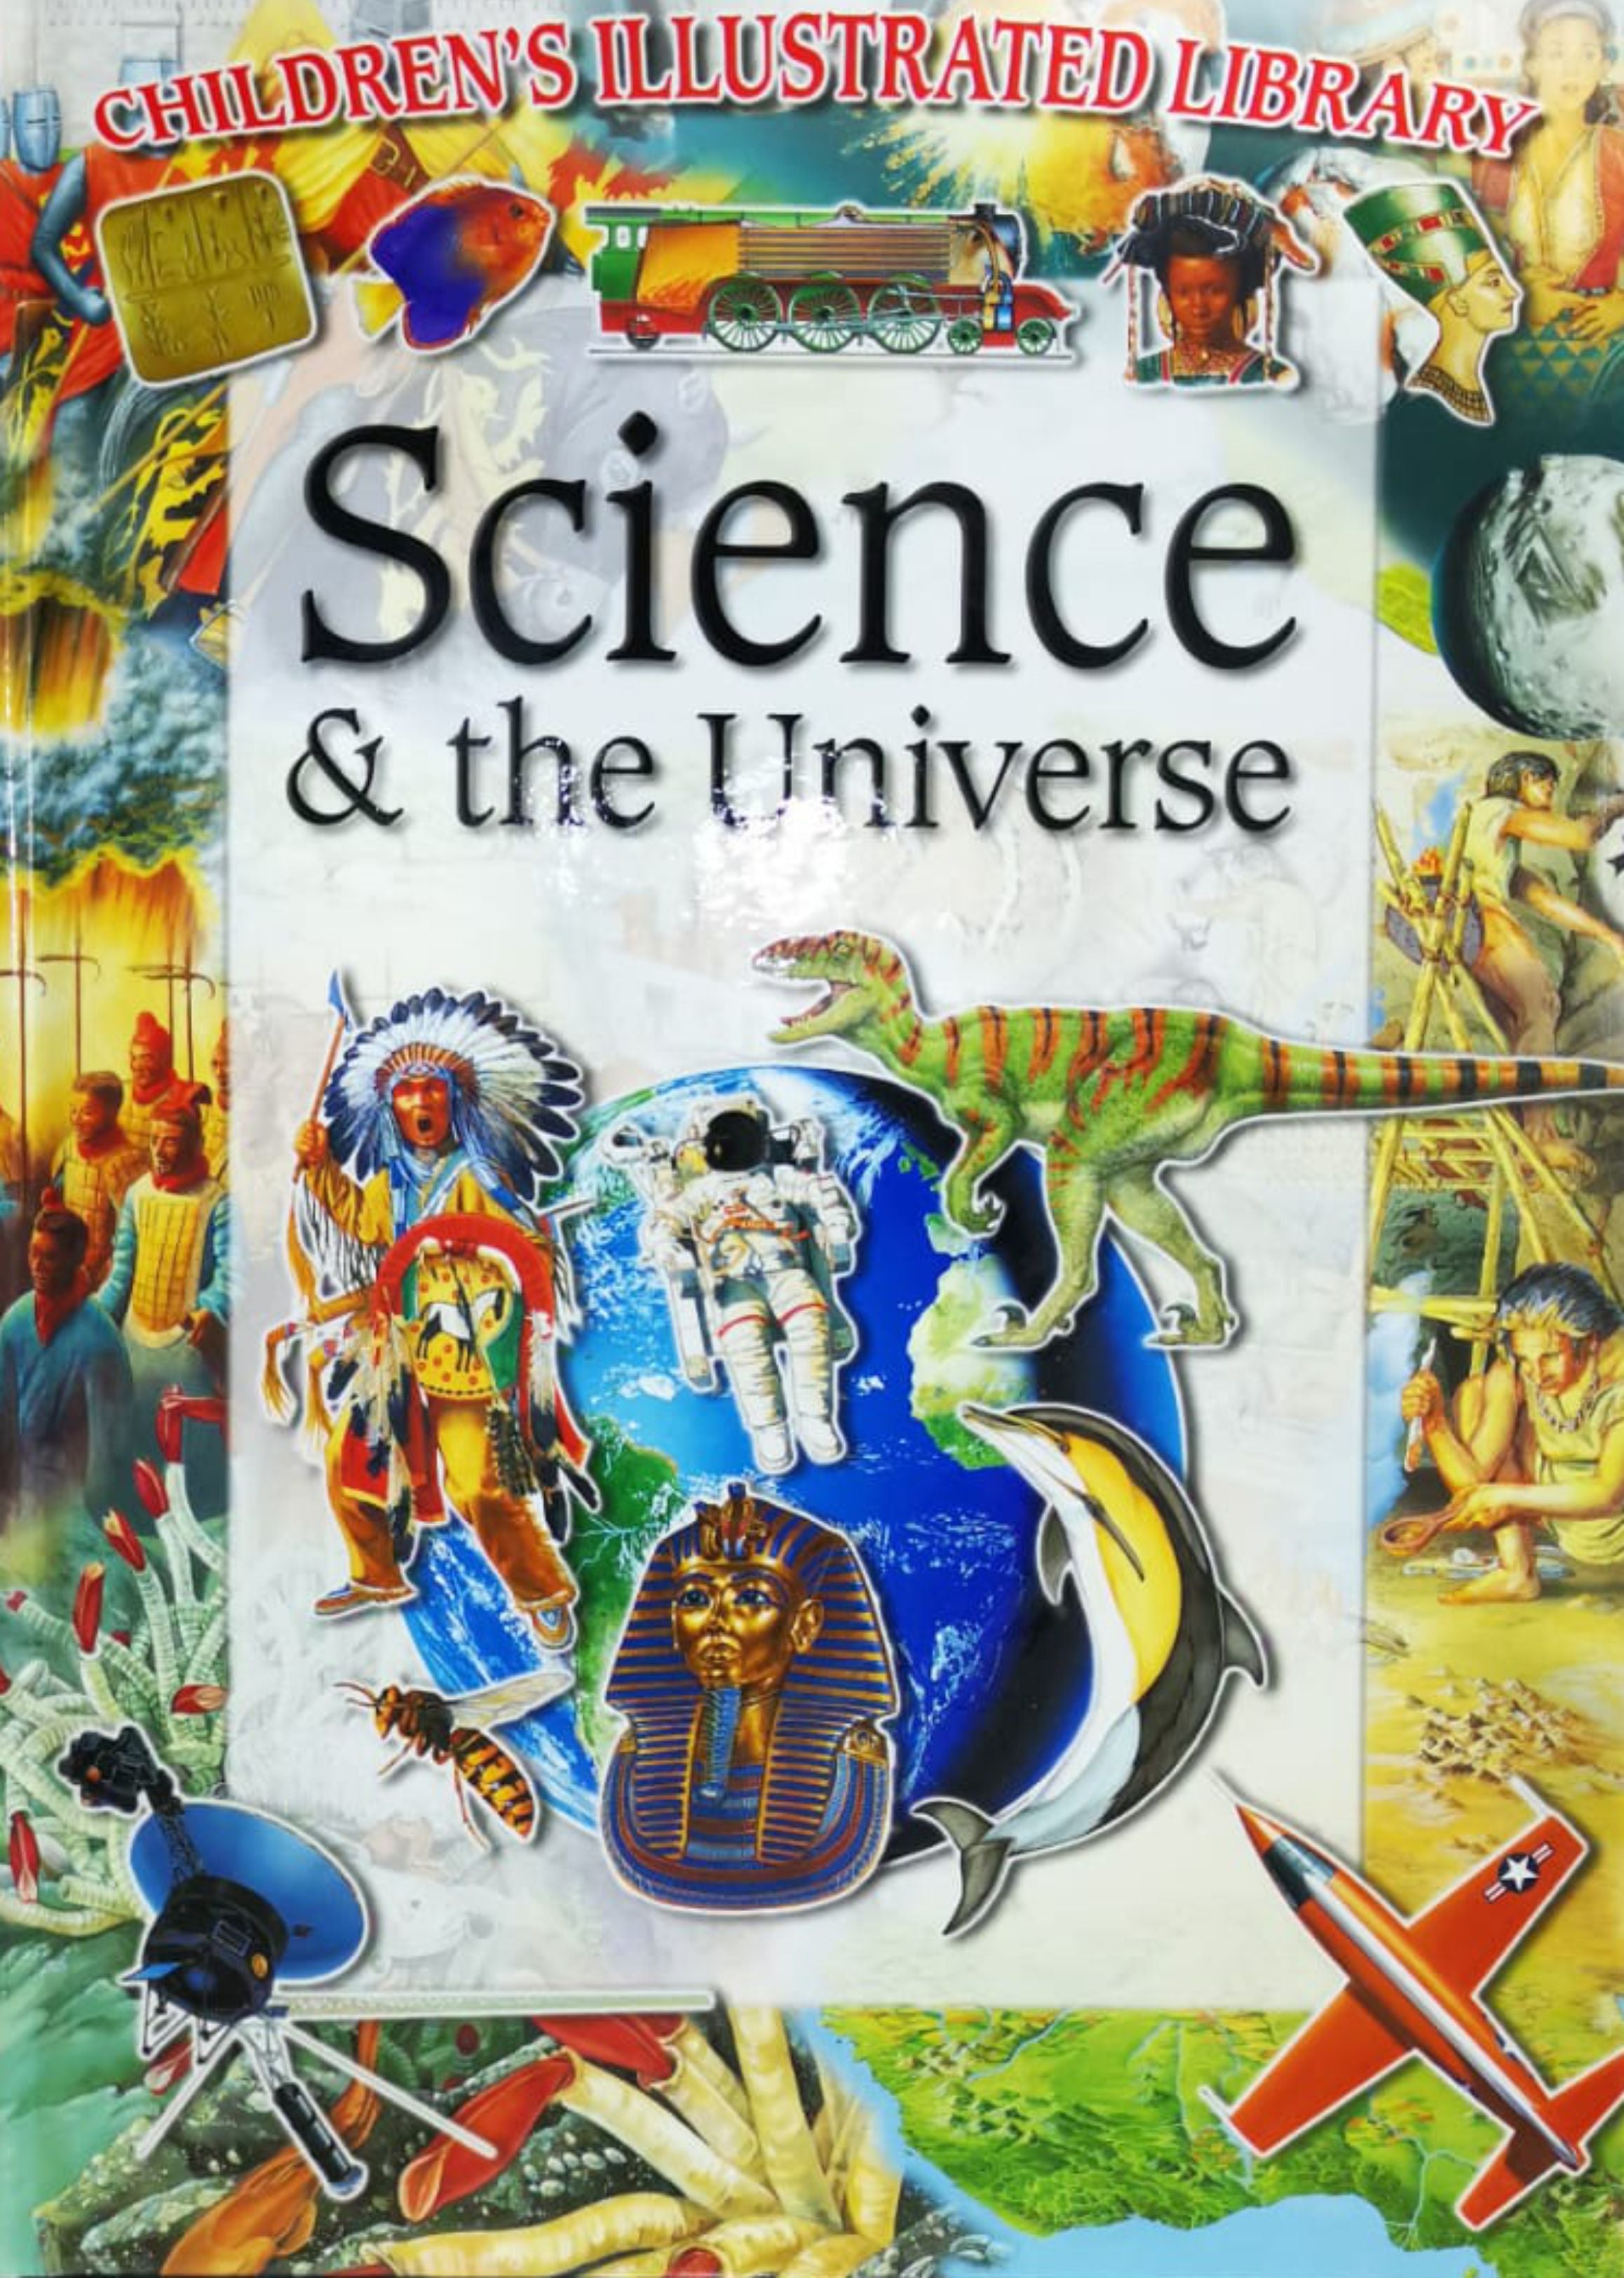 Science & the universe (Children's Illustrated Library)